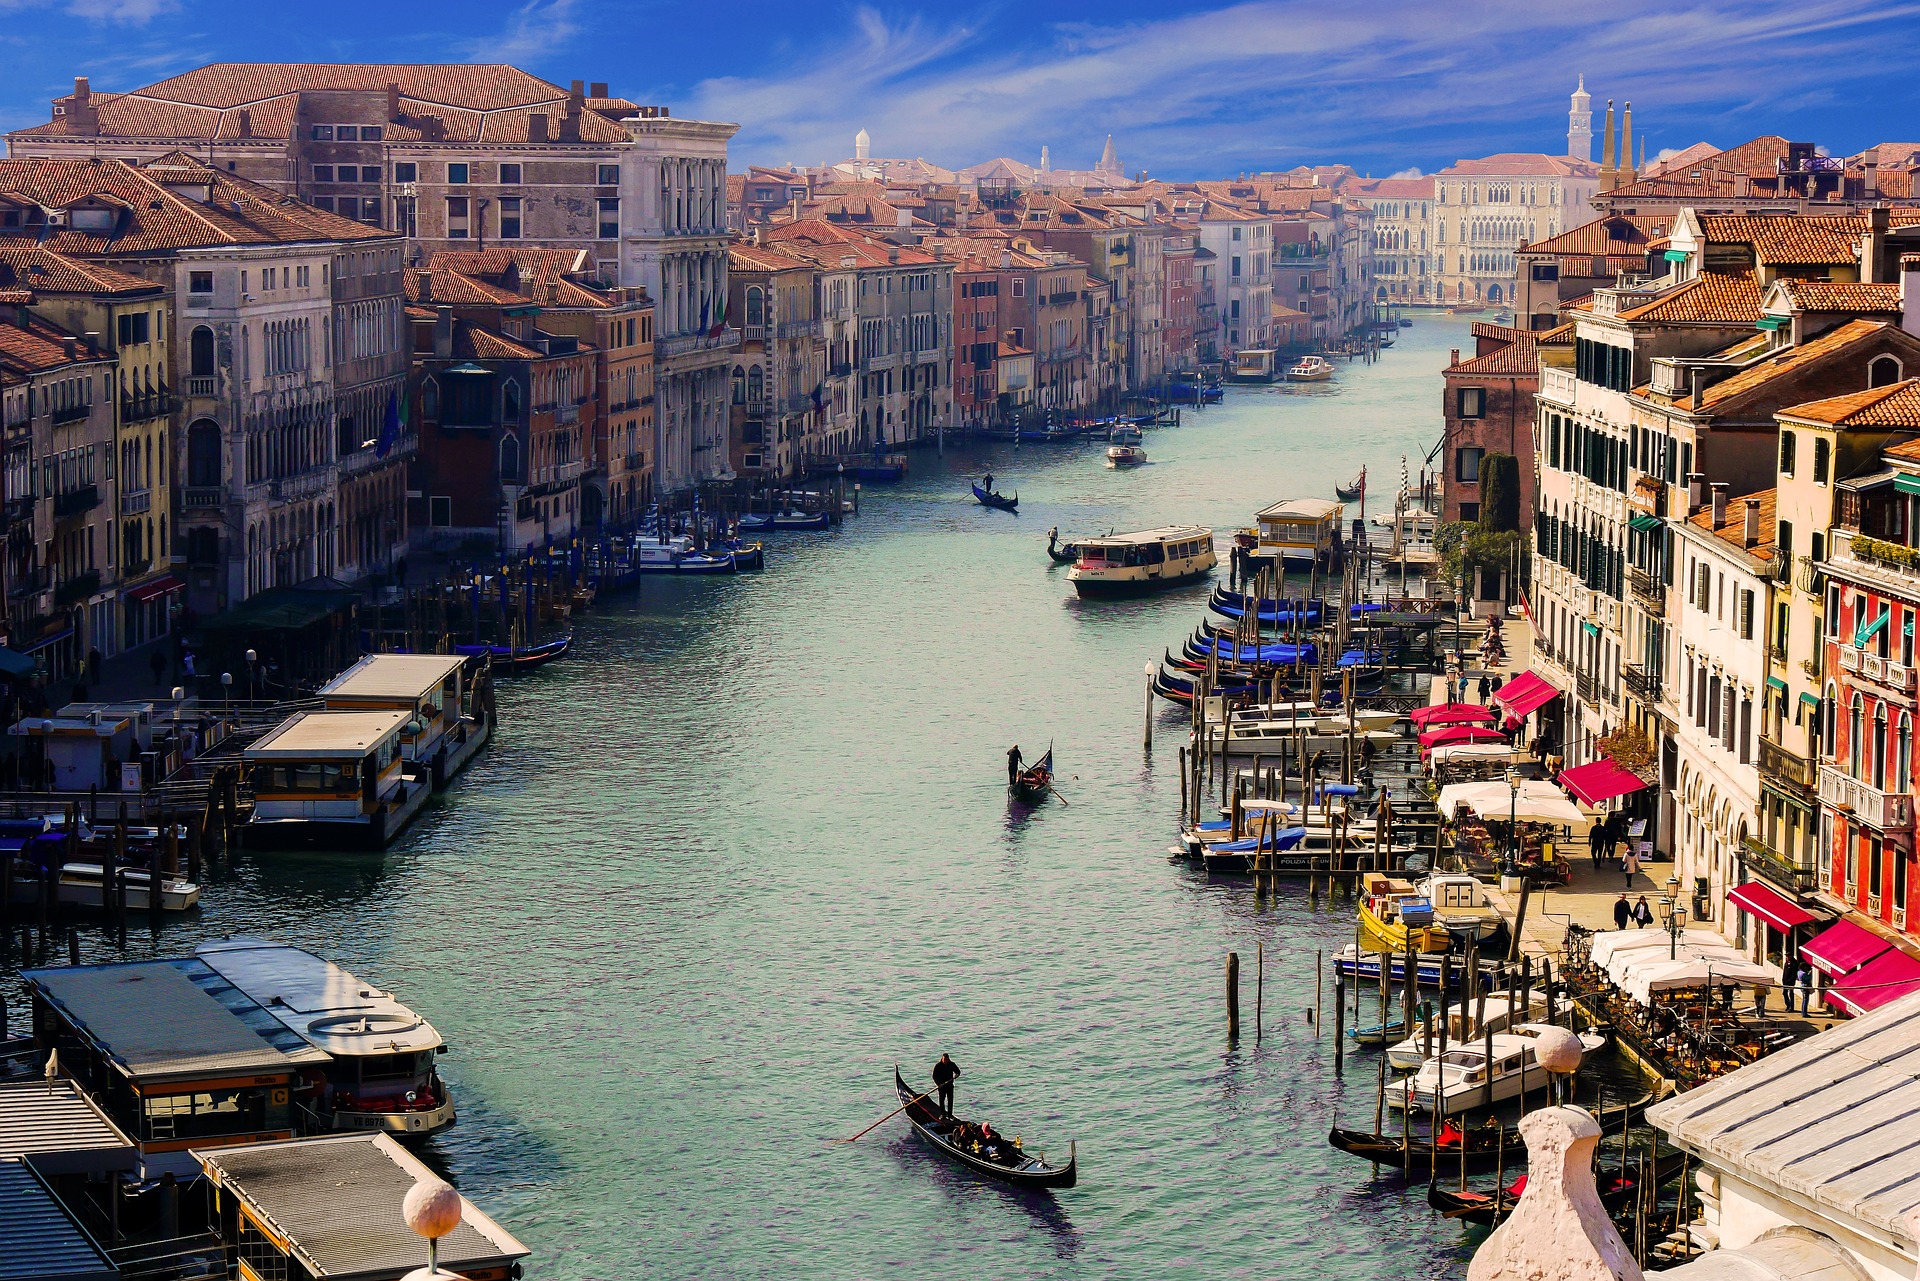 THE PROBLEM OF OVERTOURISM: YOU’LL SOON HAVE TO PAY TO ENTER VENICE